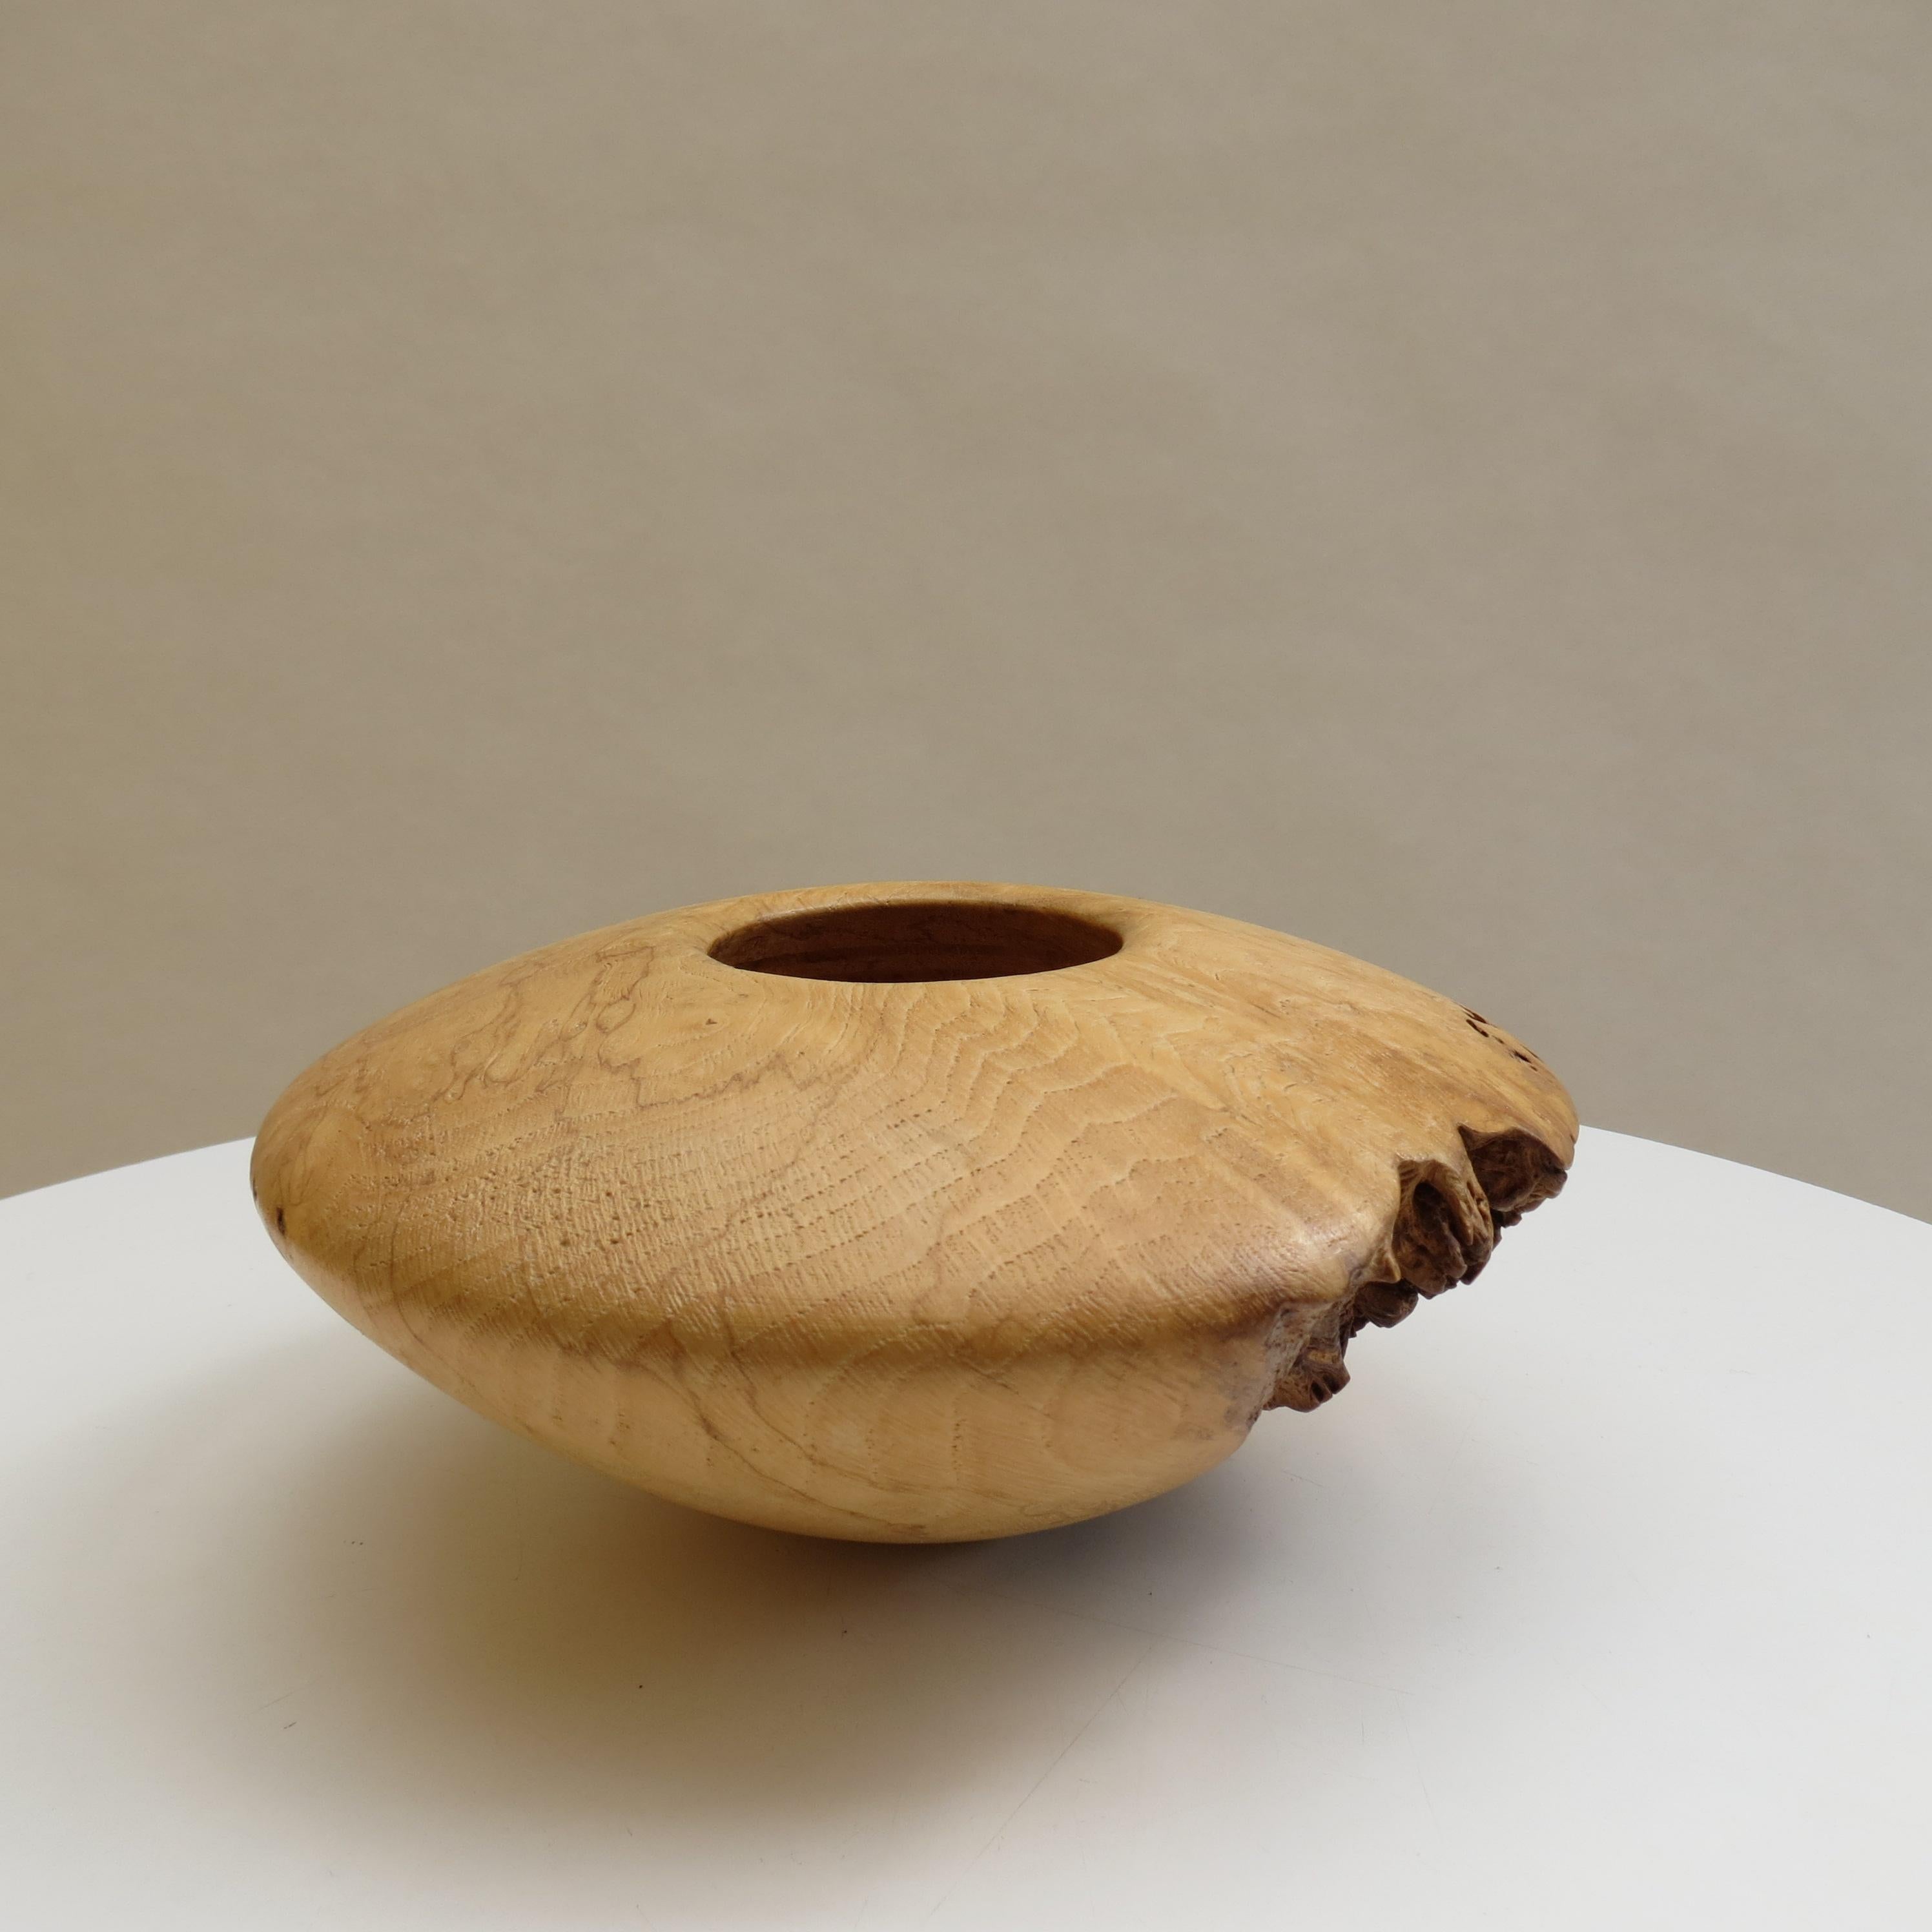 A very elegant vintage wooden sculptural pot or bowl made from burr oak, with some contrasting areas of natural burr. Wonderful shape with small circular opening to the top, hand-turned rings to the interior of the pot. Hand produced by Mike Scott